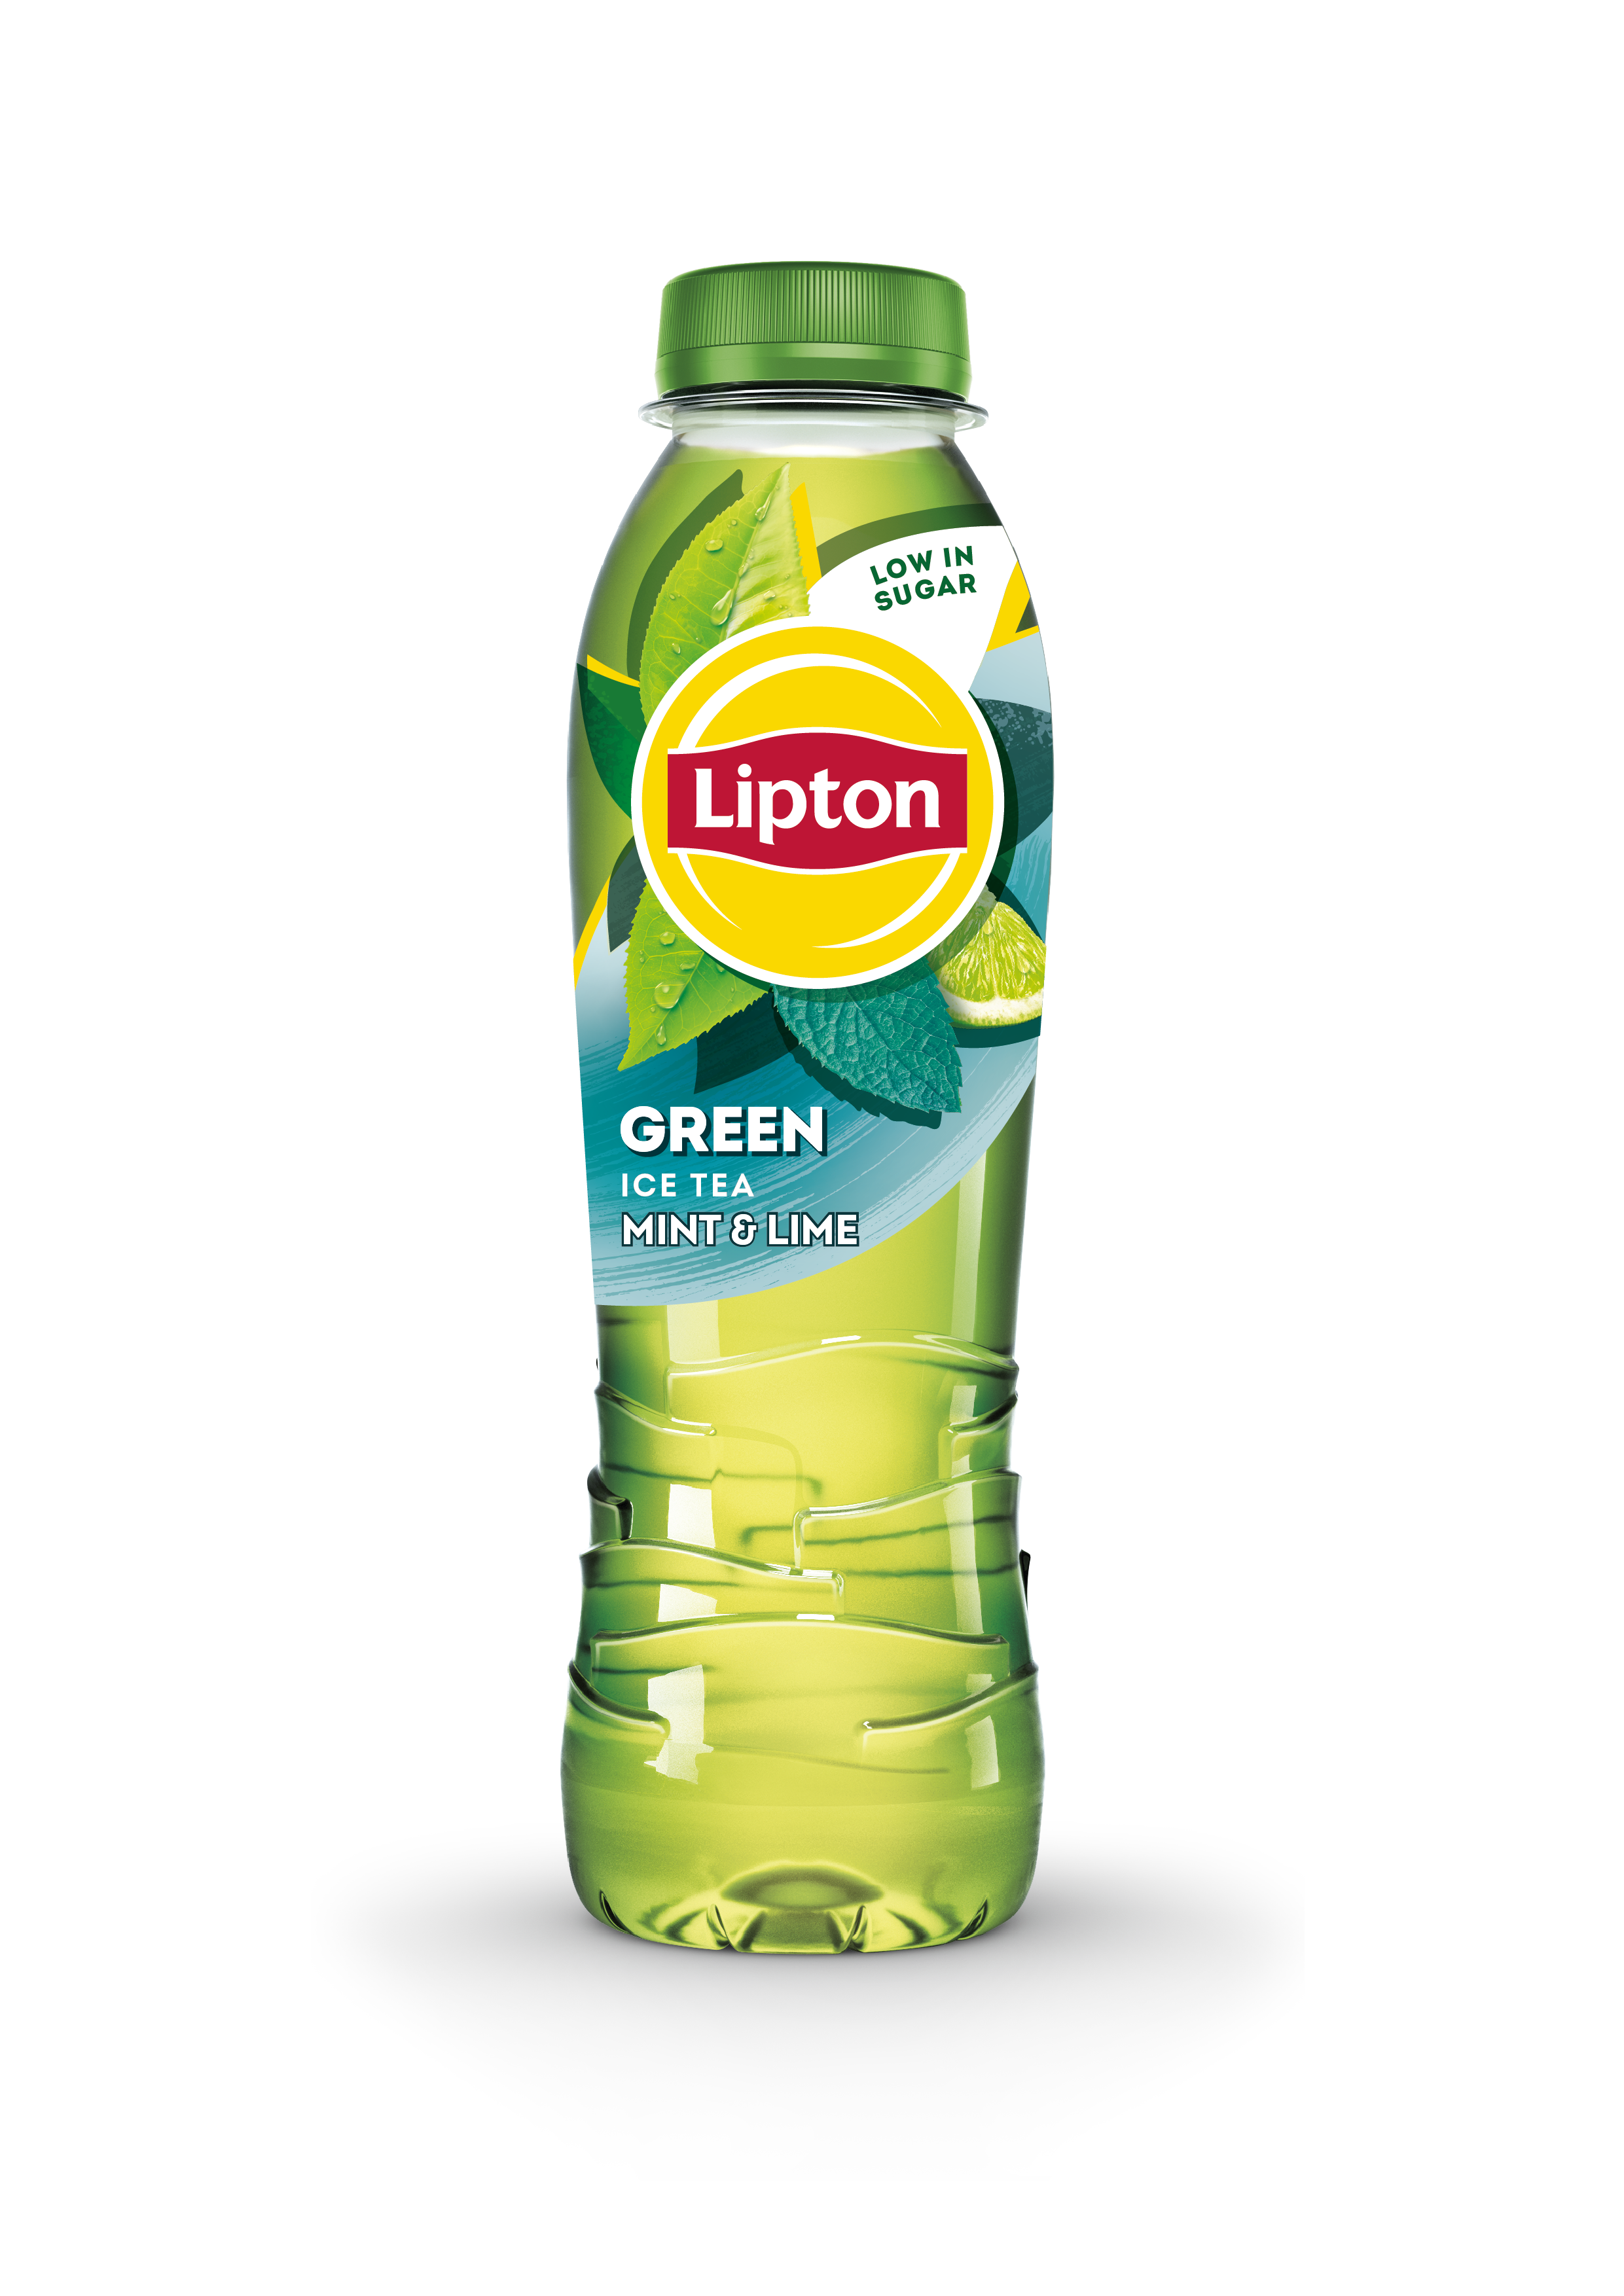 Lipton Ice Tea core range relaunch and new packaging